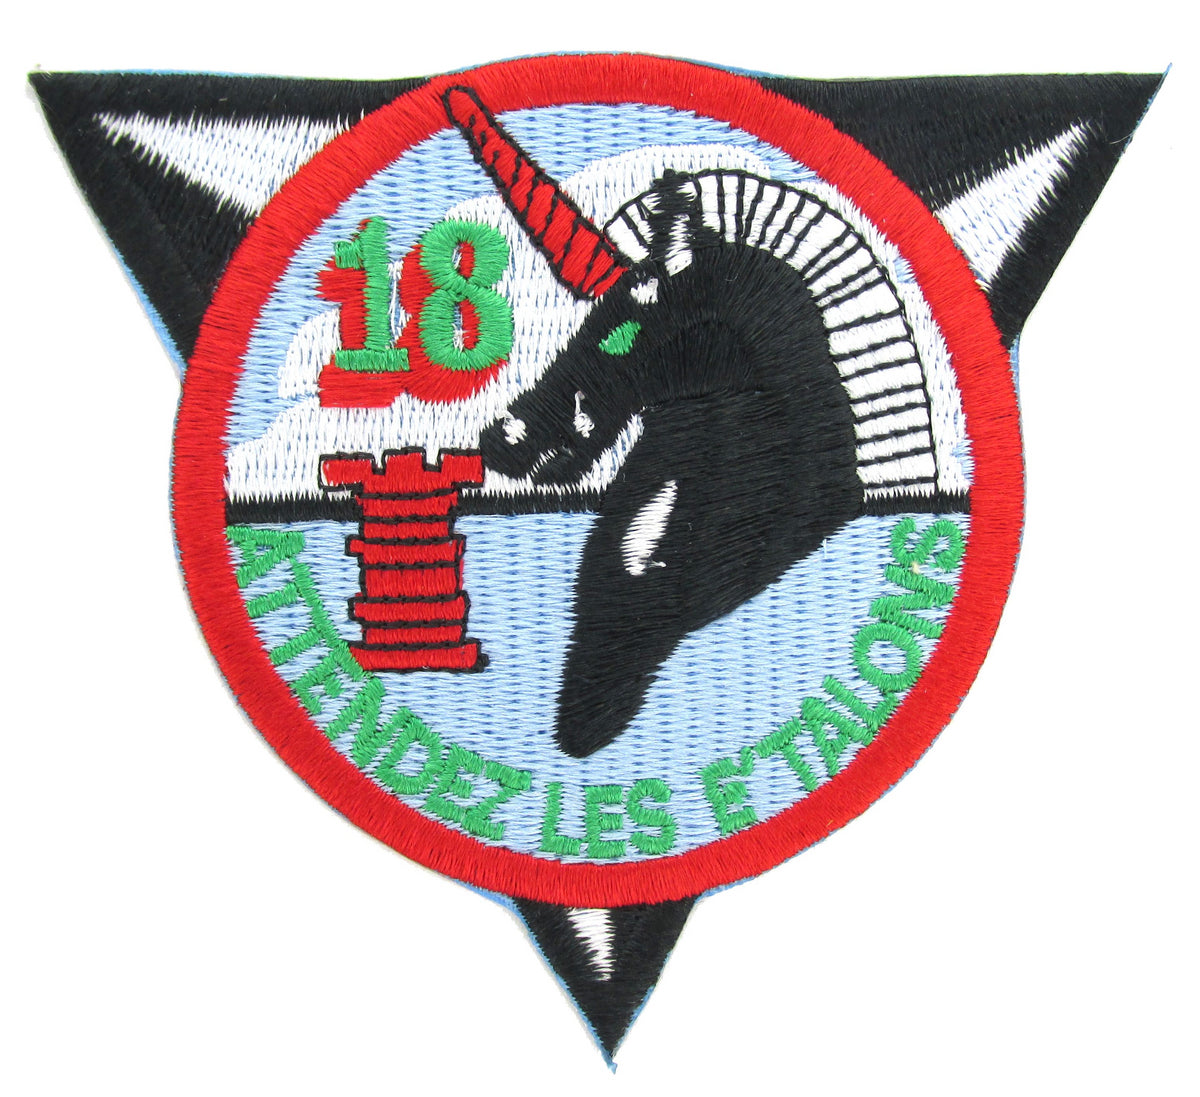  USAF Academy 18th Cadet Squadron Patch - Nightriders  